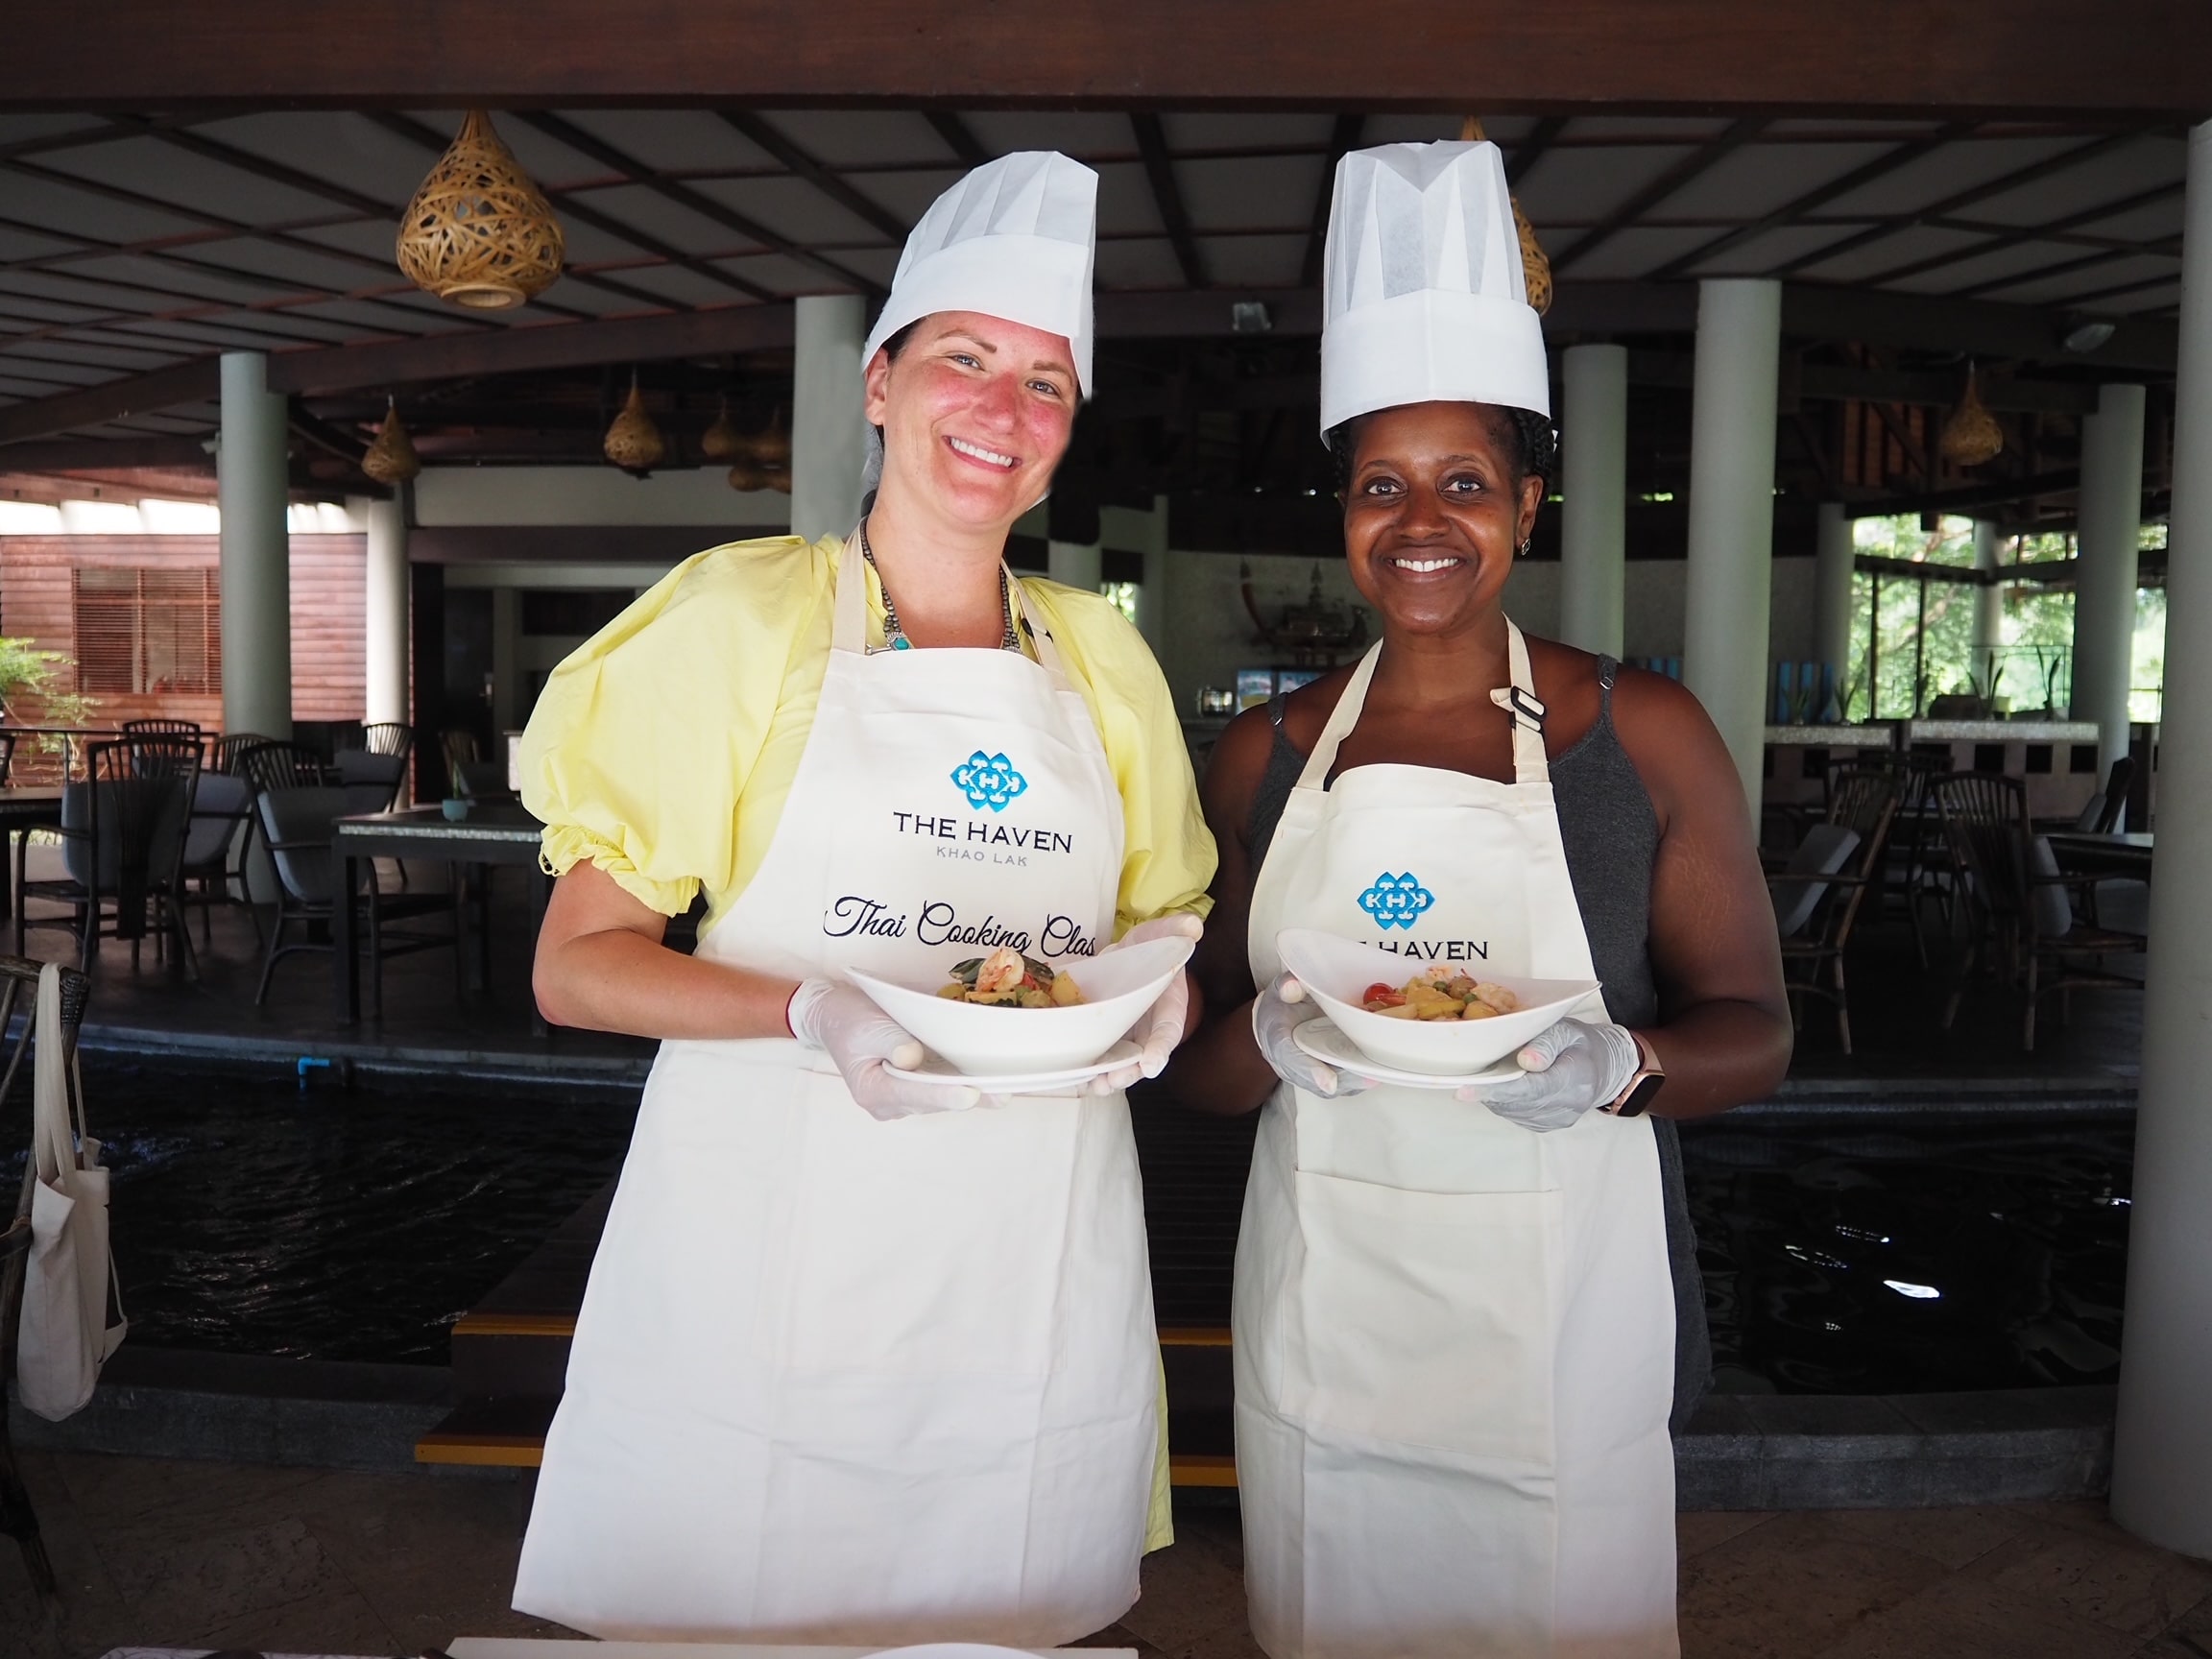 An image of Ariel and her friend posing with their dishes made during their Thai cooking class.